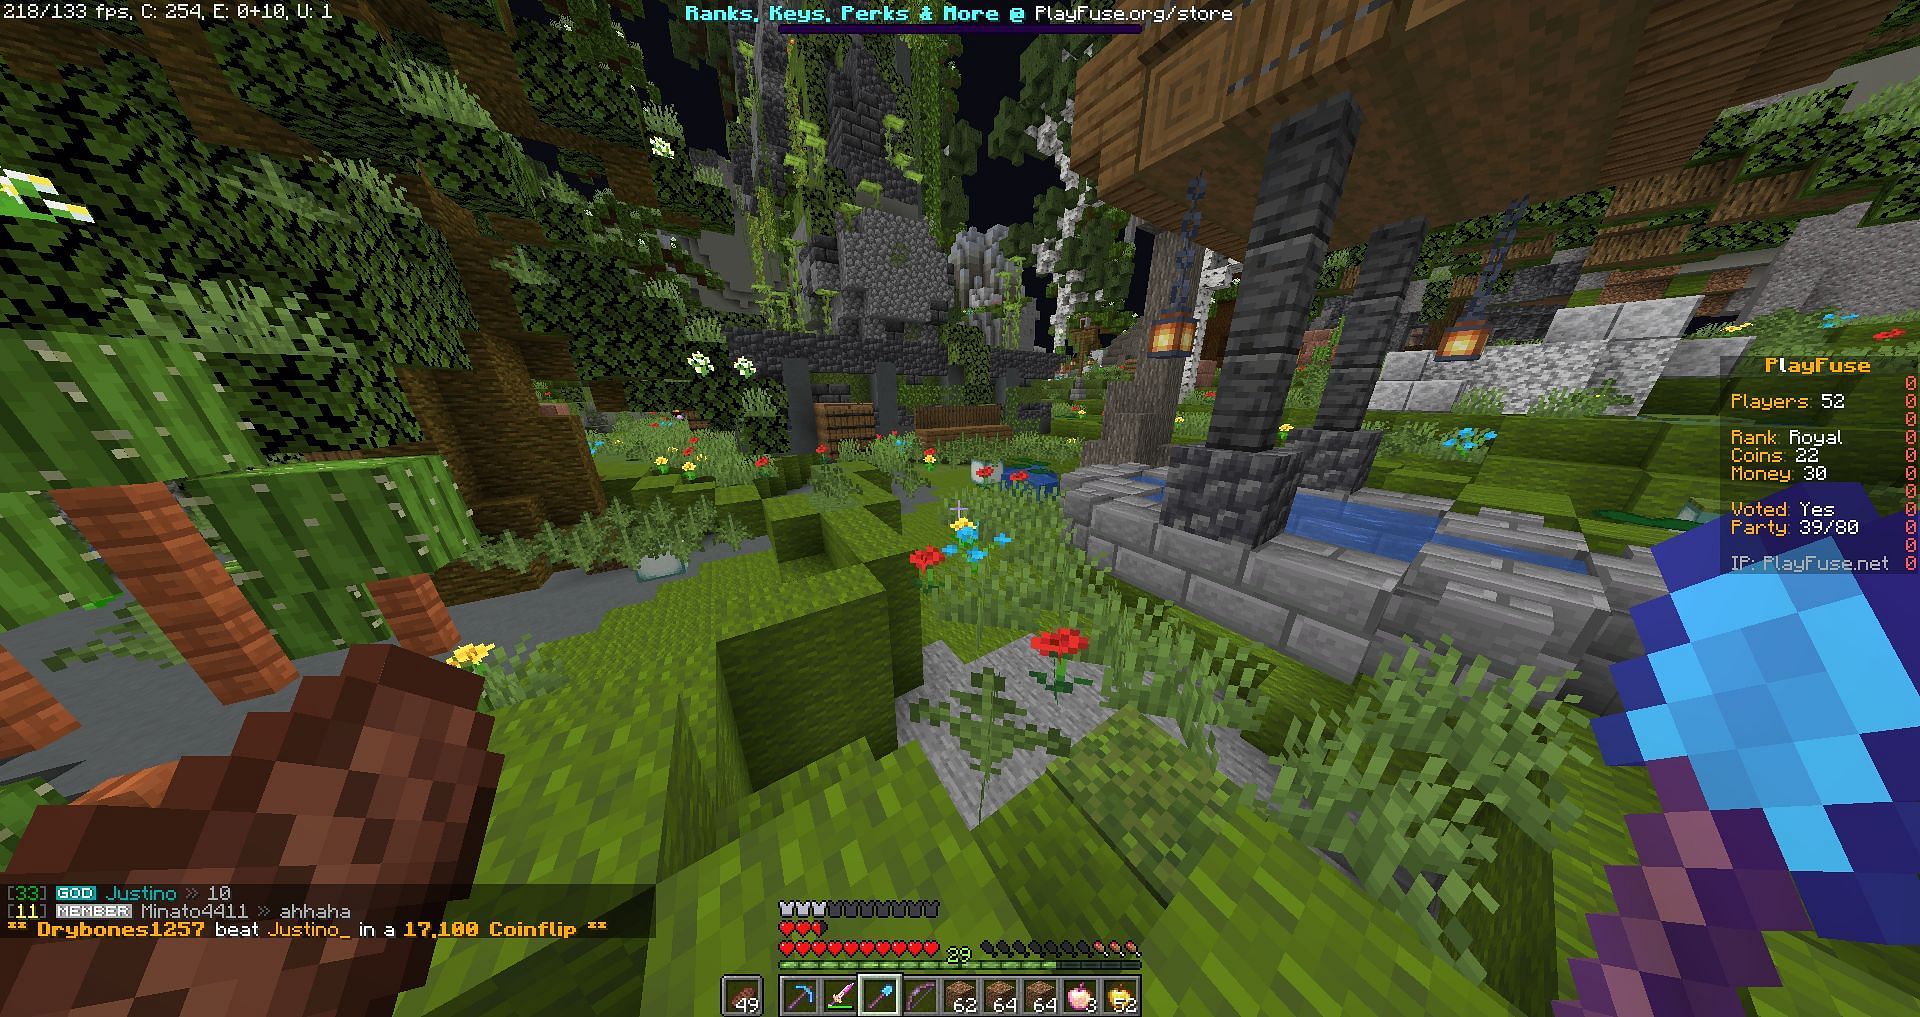 PlayFuse is a great Minecraft SMP server. (Image credits: PlayFuse Discord)